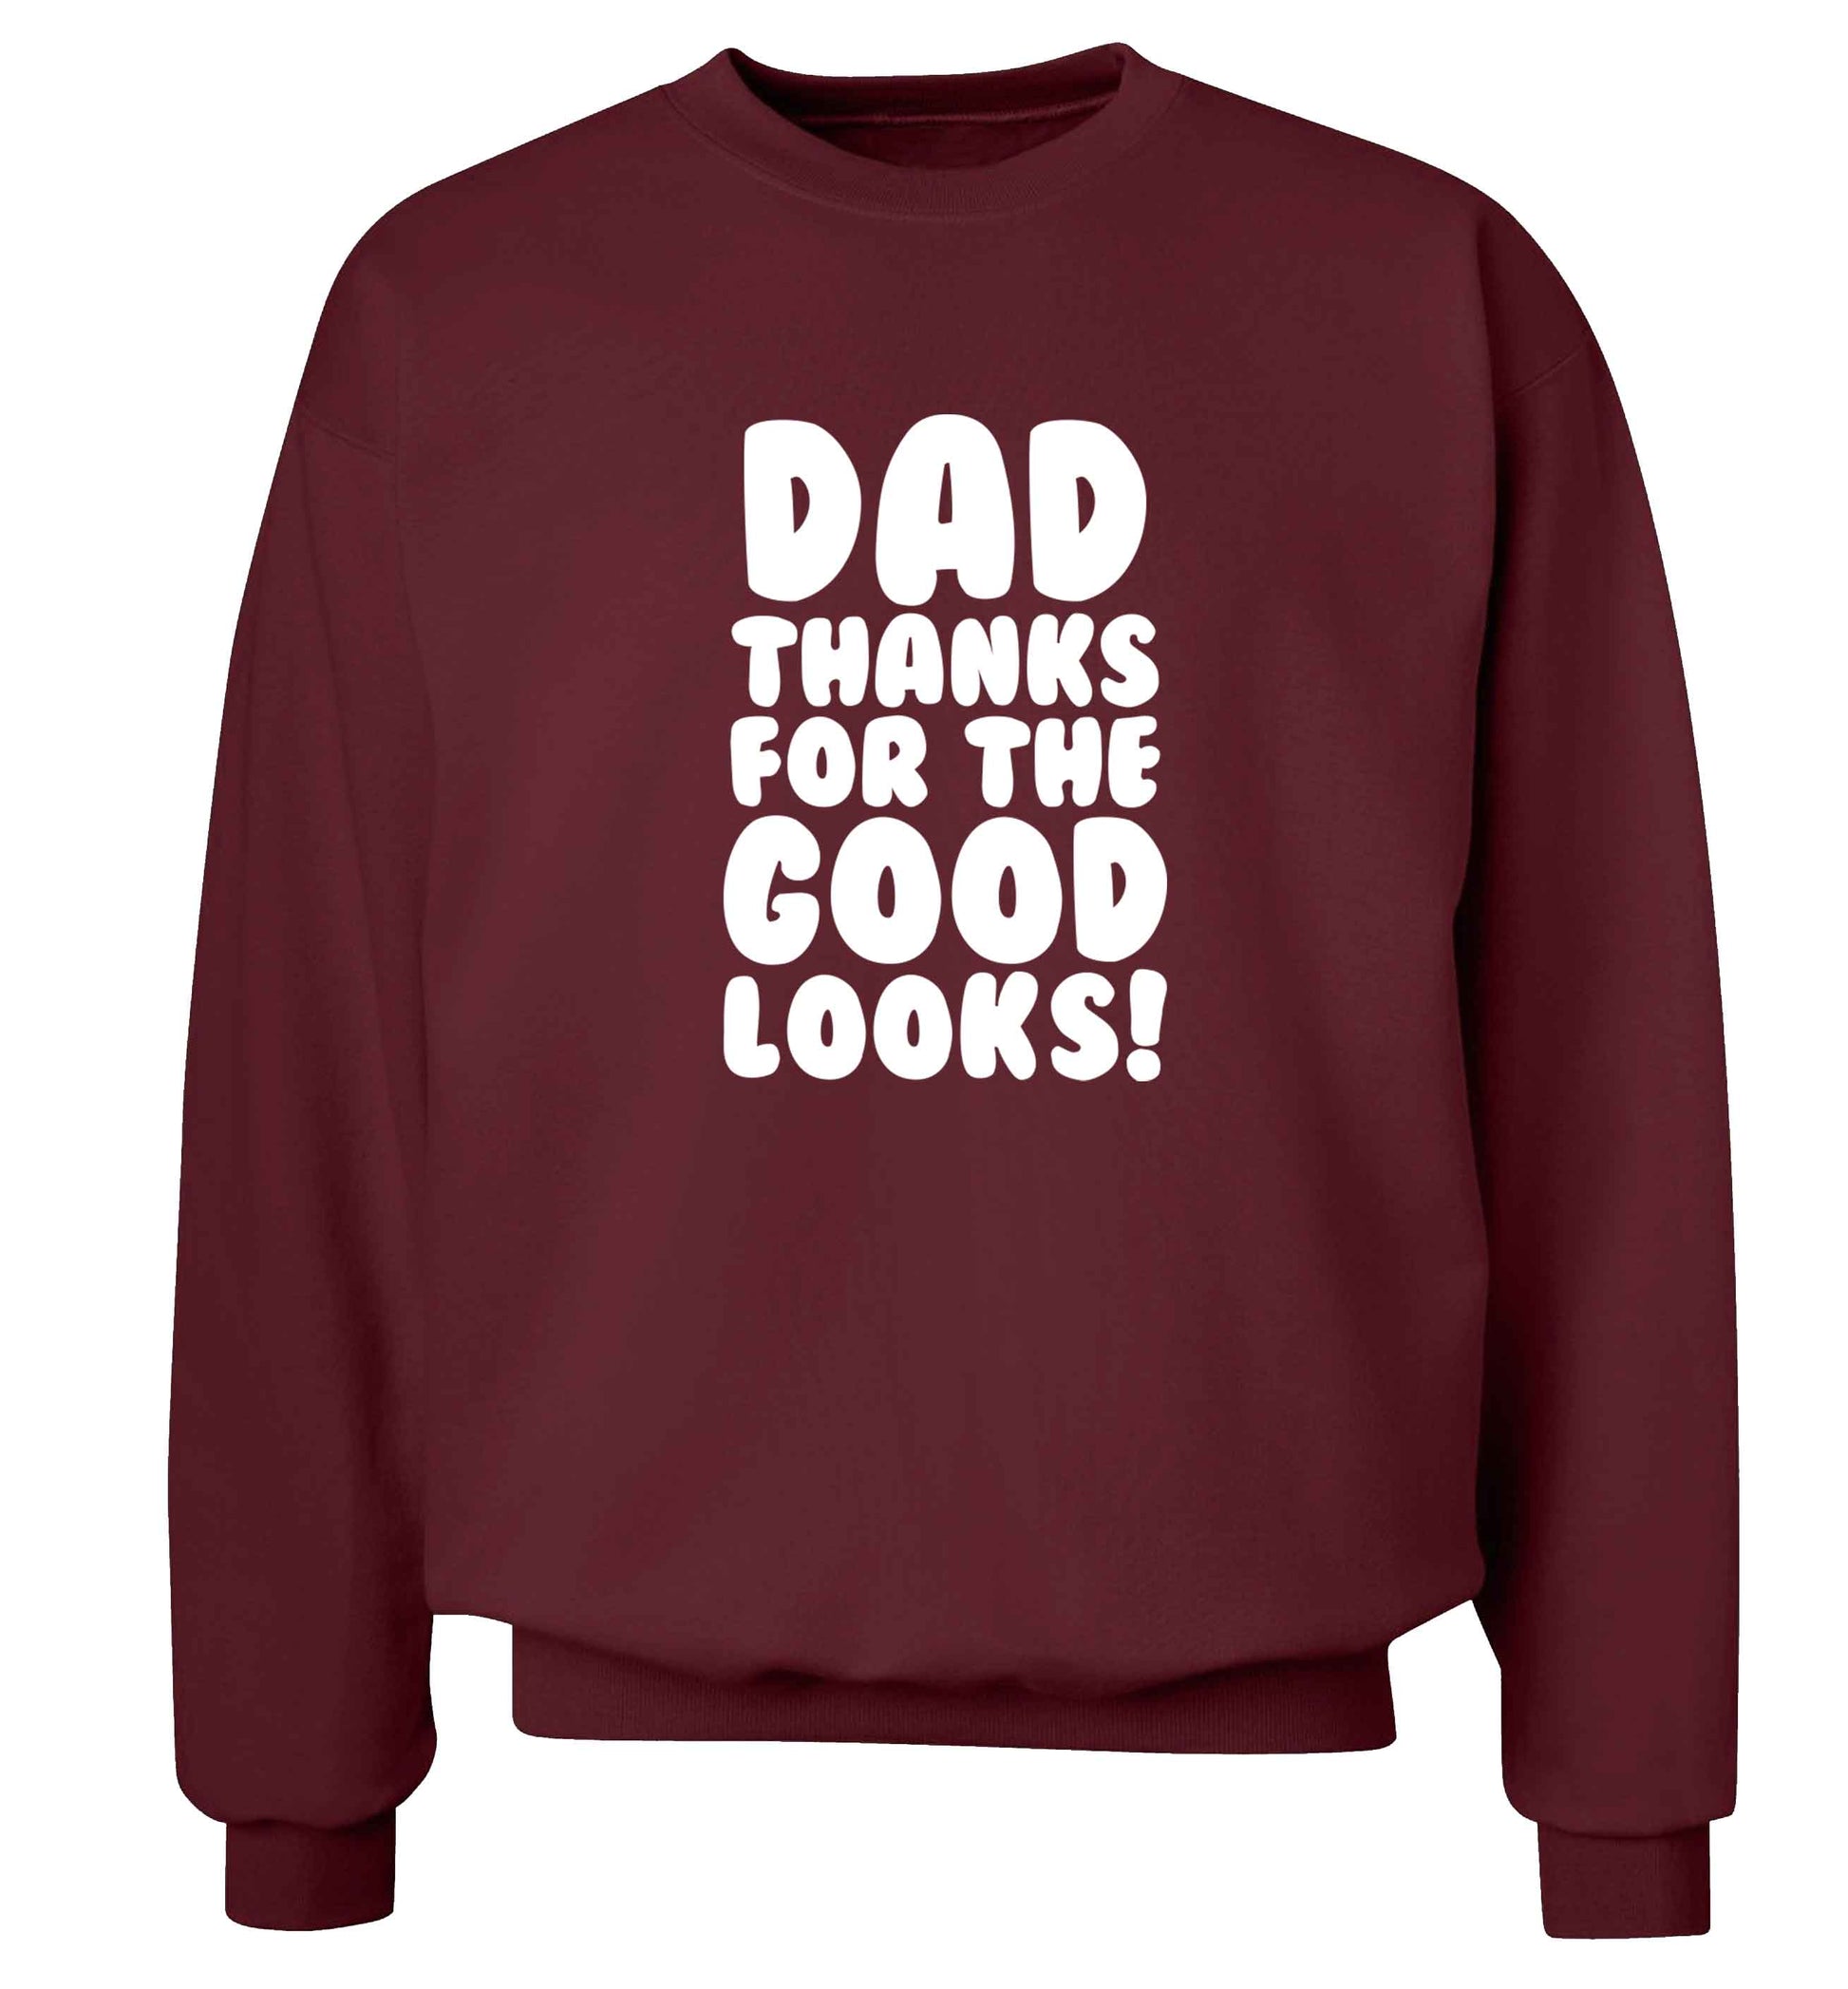 Dad thanks for the good looks adult's unisex maroon sweater 2XL